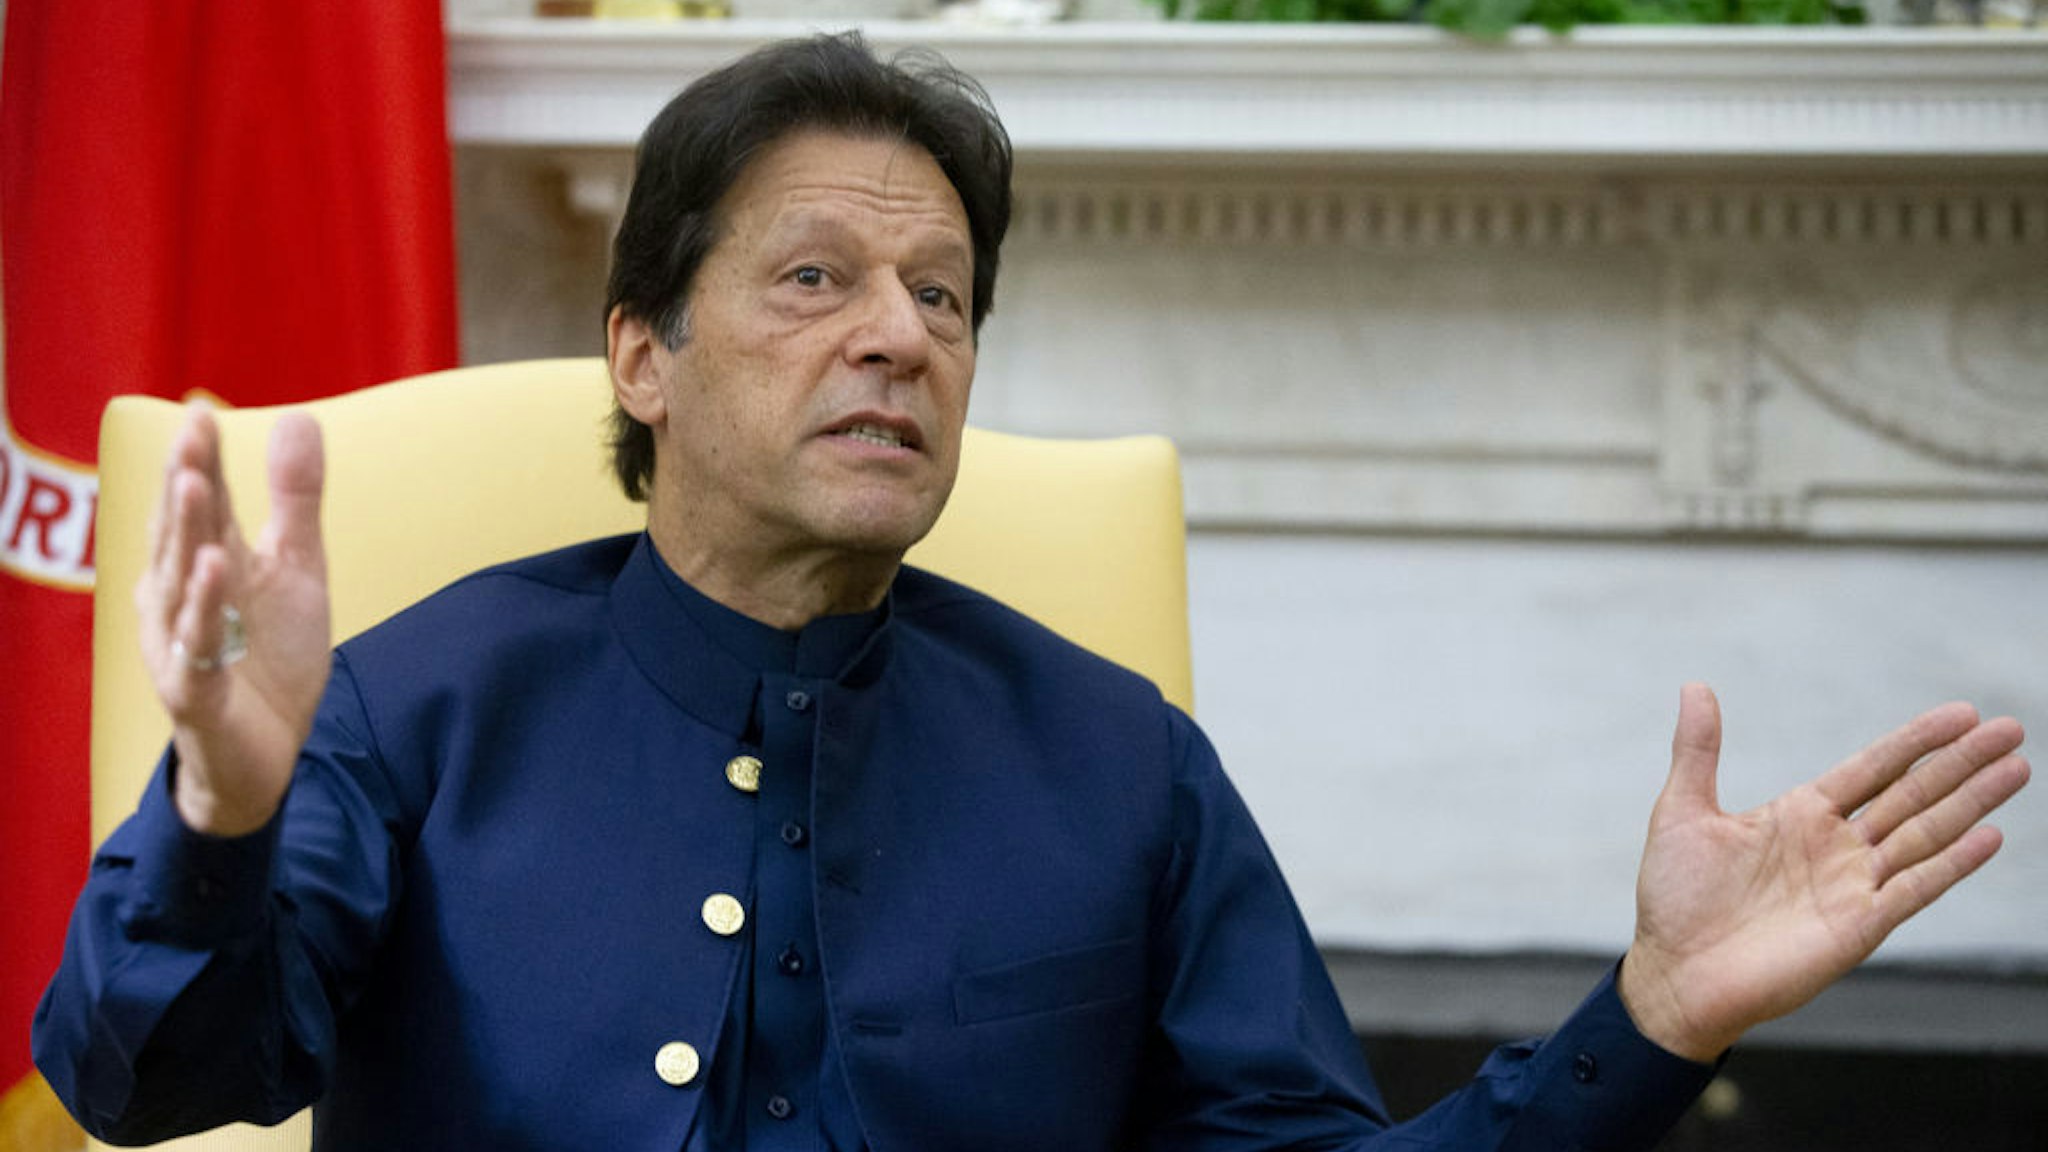 Imran Khan, Pakistan's prime minister, speaks during a meeting with U.S. President Donald Trump, not pictured, in the Oval Office of the White House in Washington, D.C., U.S., on Monday, July 22, 2019.